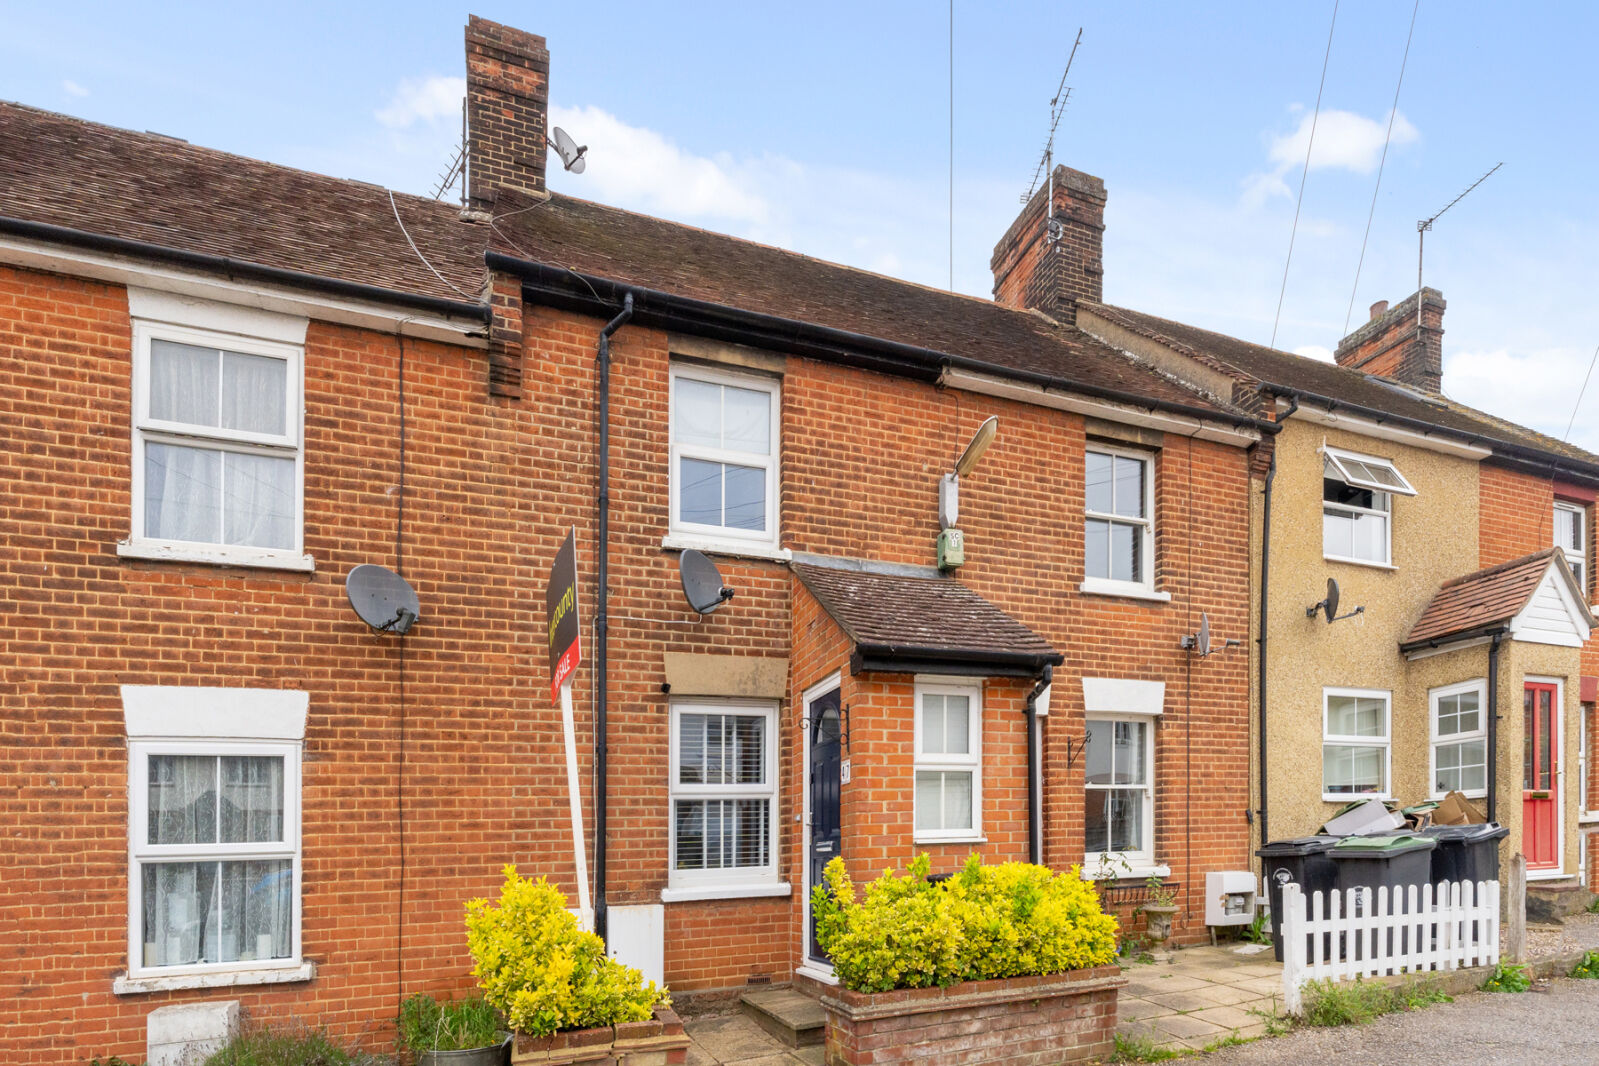 2 bedroom mid terraced house for sale Stoney Common, Stansted, CM24, main image